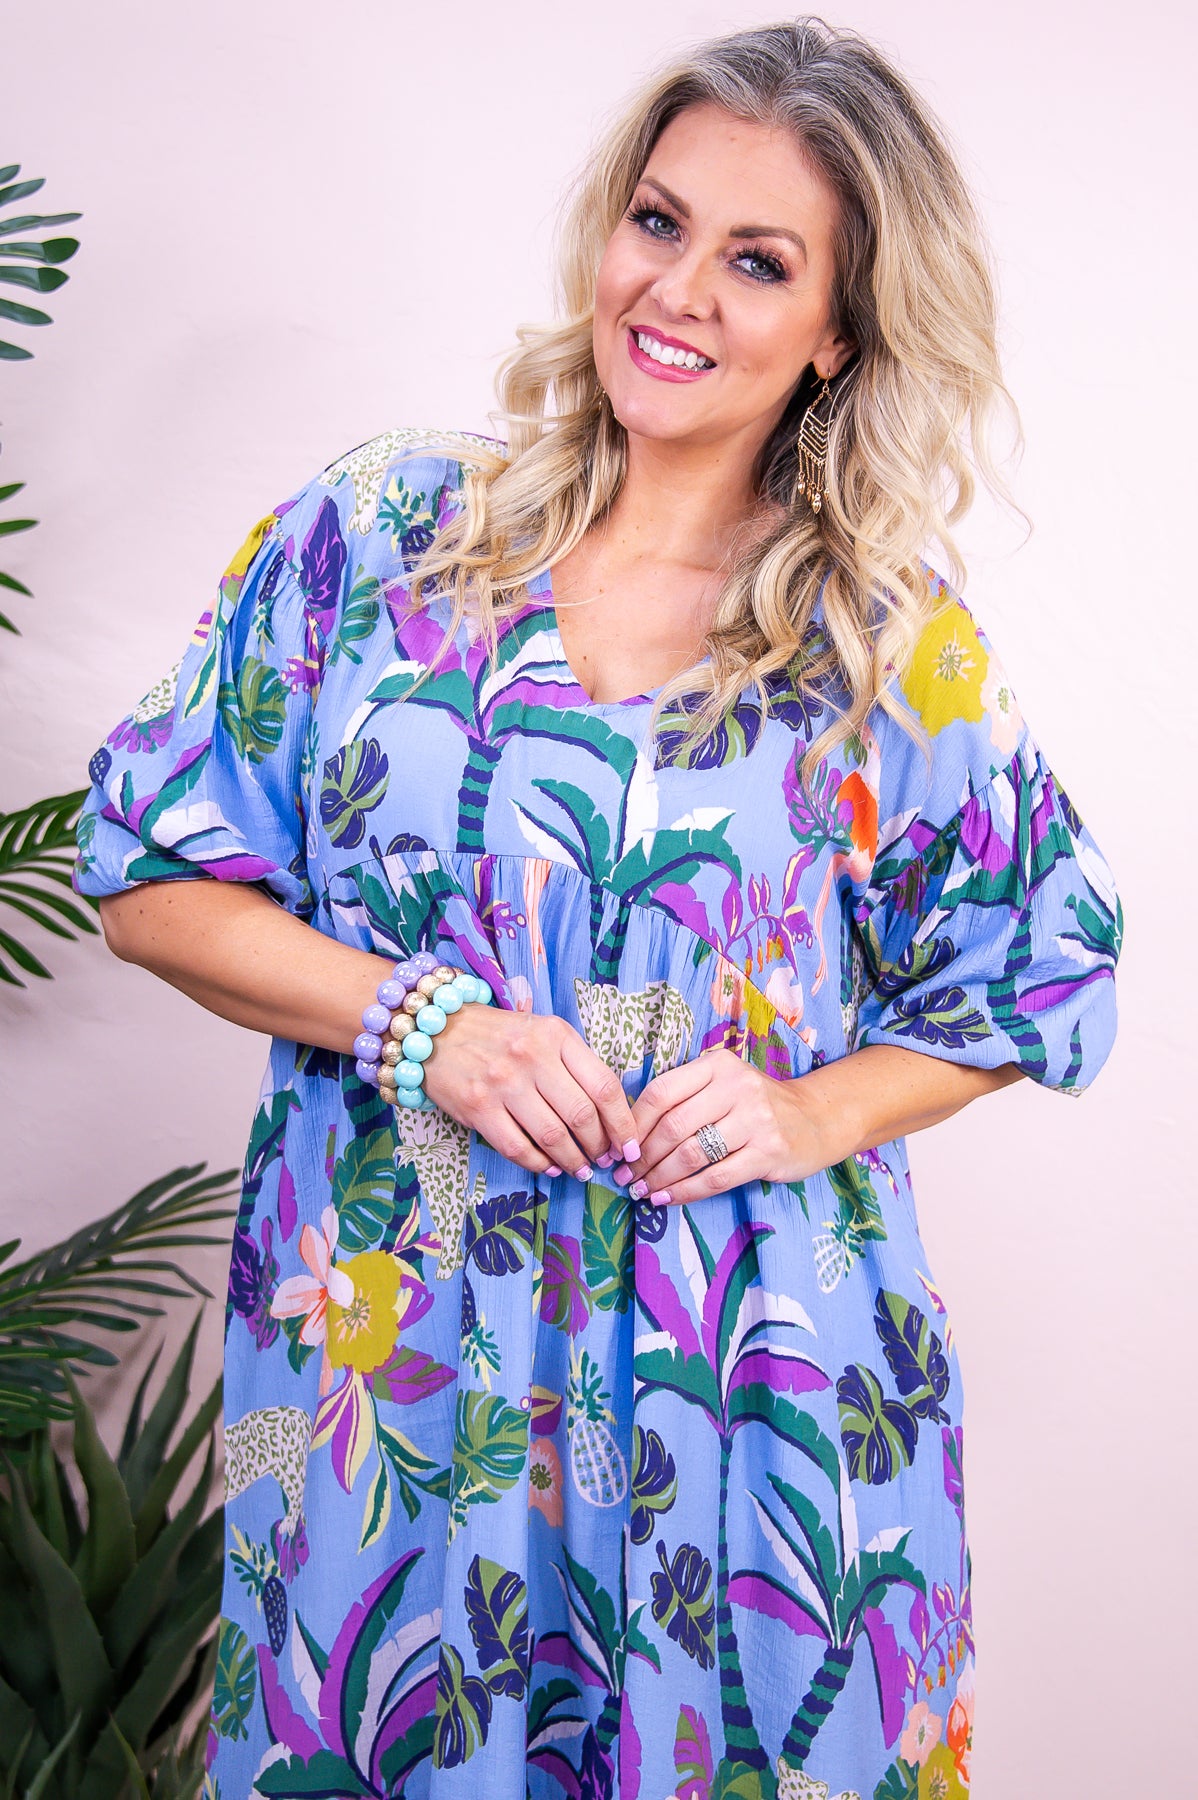 Dreaming Of Paradise Periwinkle/Multi Color Floral/Printed Dress - D5214PW